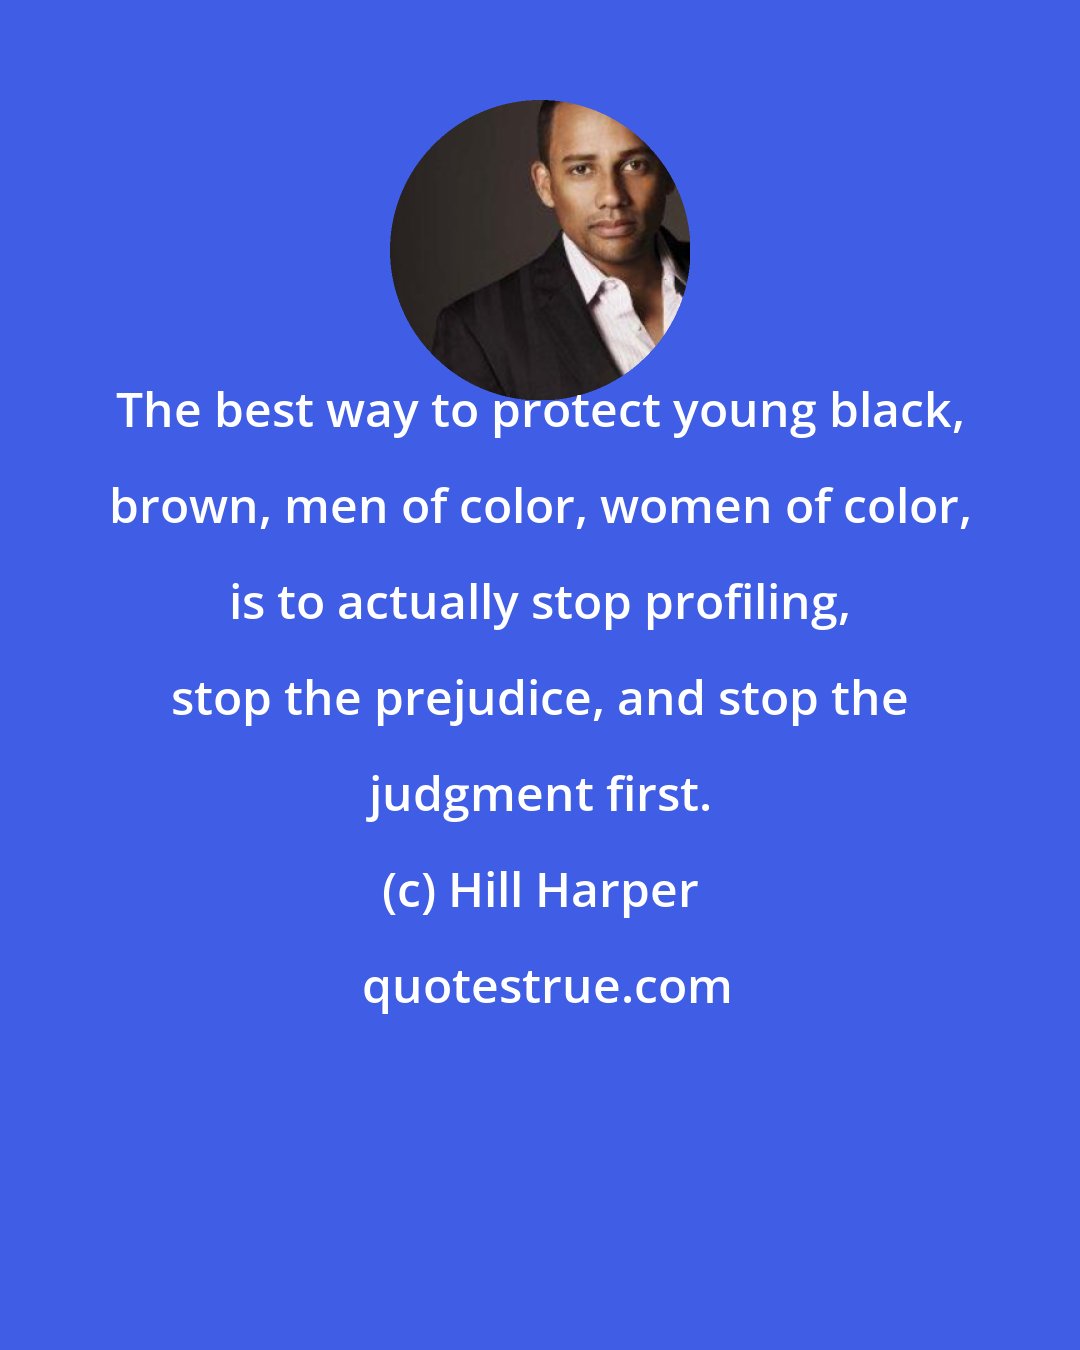 Hill Harper: The best way to protect young black, brown, men of color, women of color, is to actually stop profiling, stop the prejudice, and stop the judgment first.